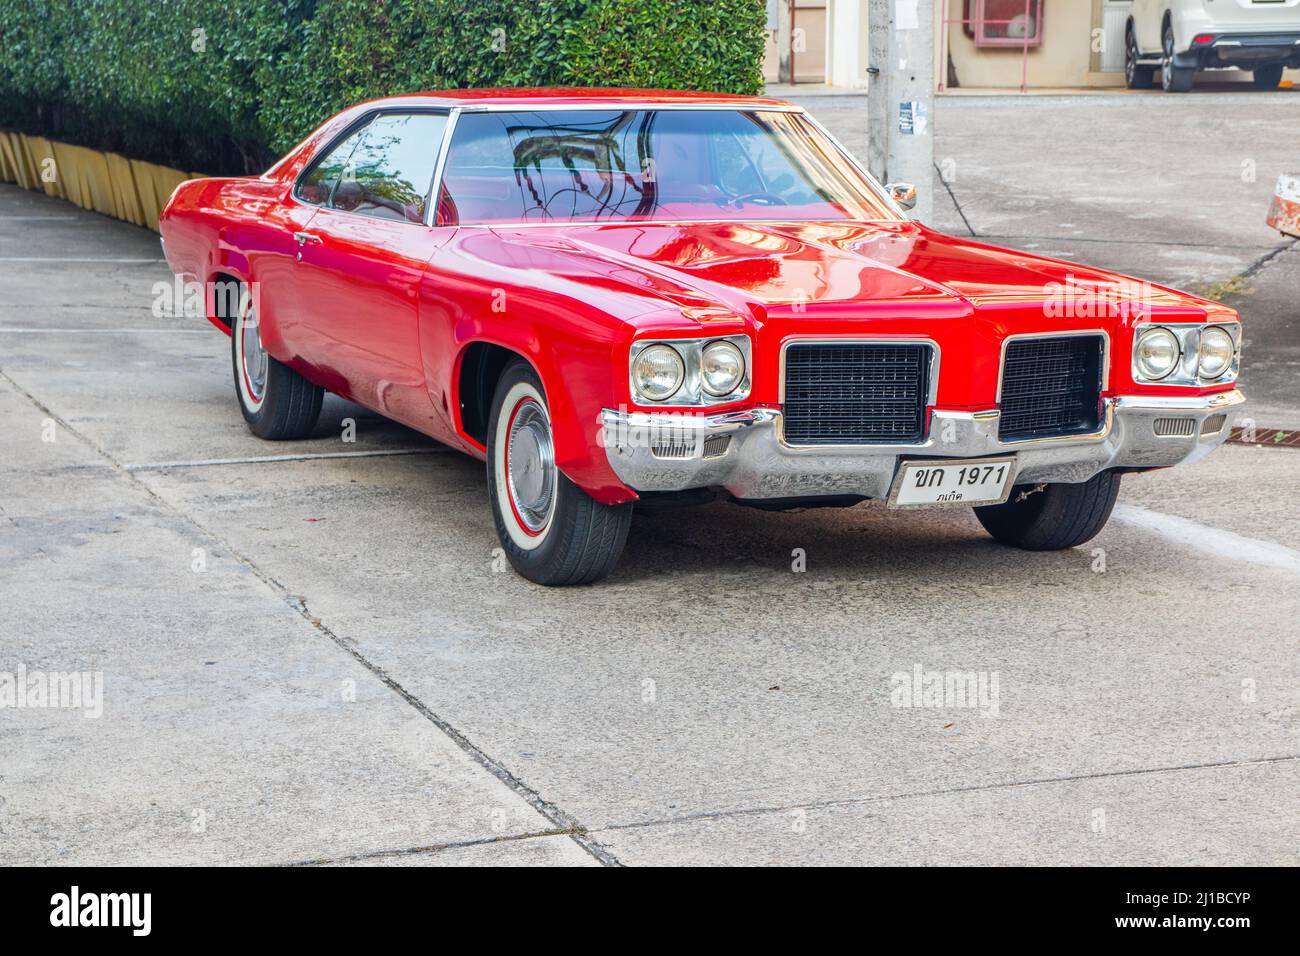 An American red-painted classic car, Oldsmobile Delta 88 from 1971, in Bangkok, Thailand Stock Photo